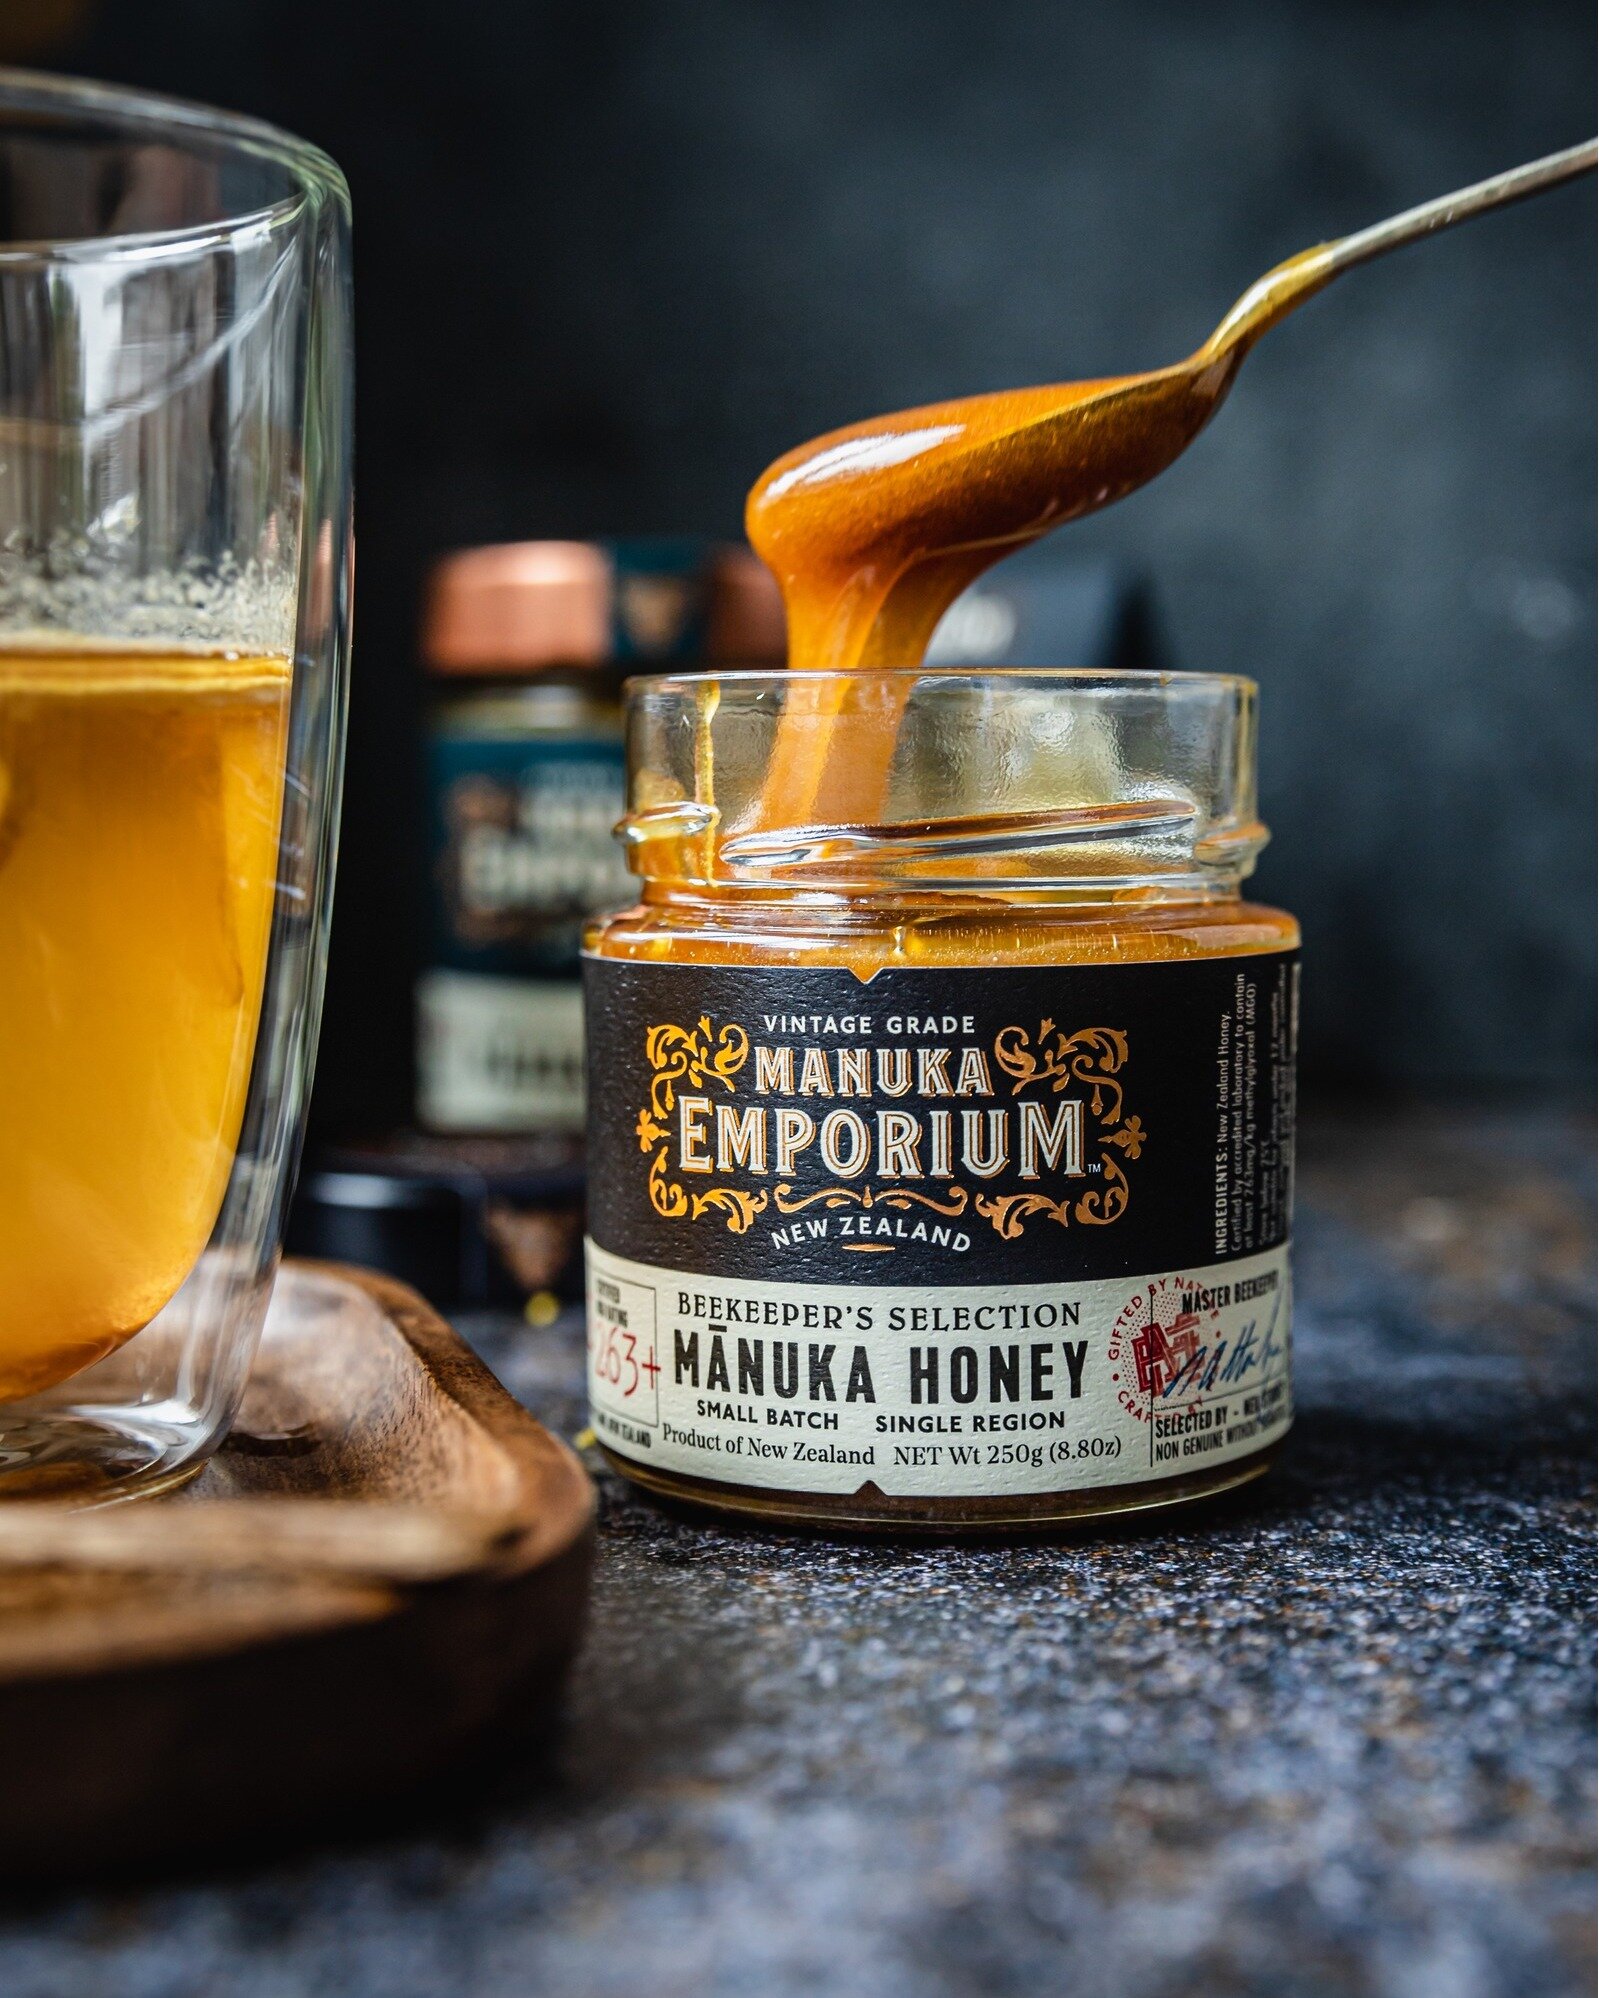 Sip, unwind, and embrace the tranquility of a Hot Toddy with Manuka Emporium &ndash; your passport to ultimate relaxation!

#manukaemporium 
#mānukahoney 
#hottoddyday 
#relaxation